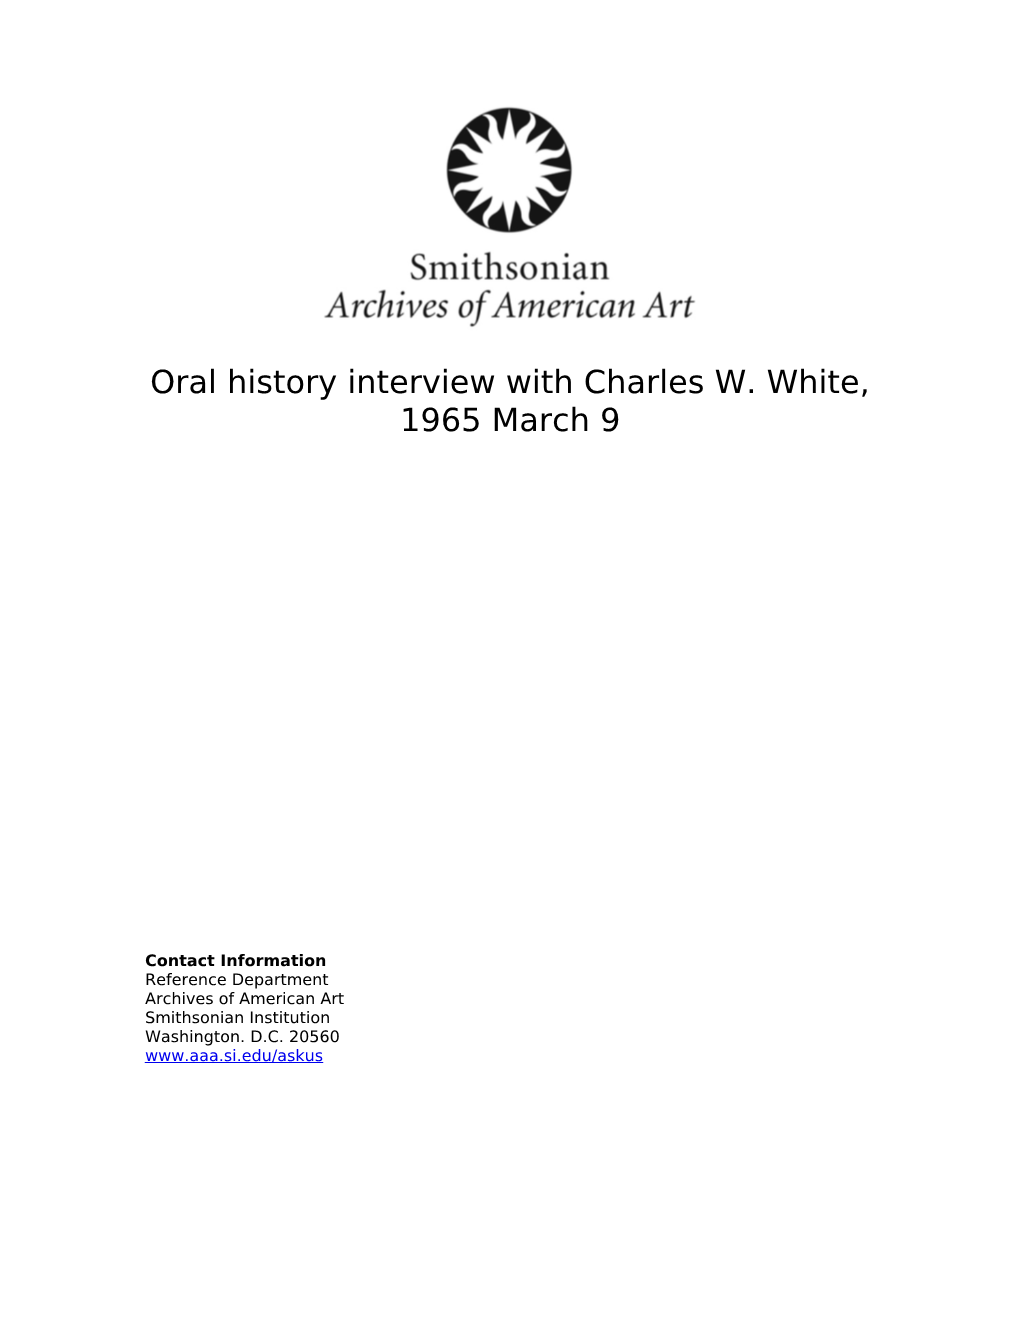 Oral History Interview with Charles W. White, 1965 March 9